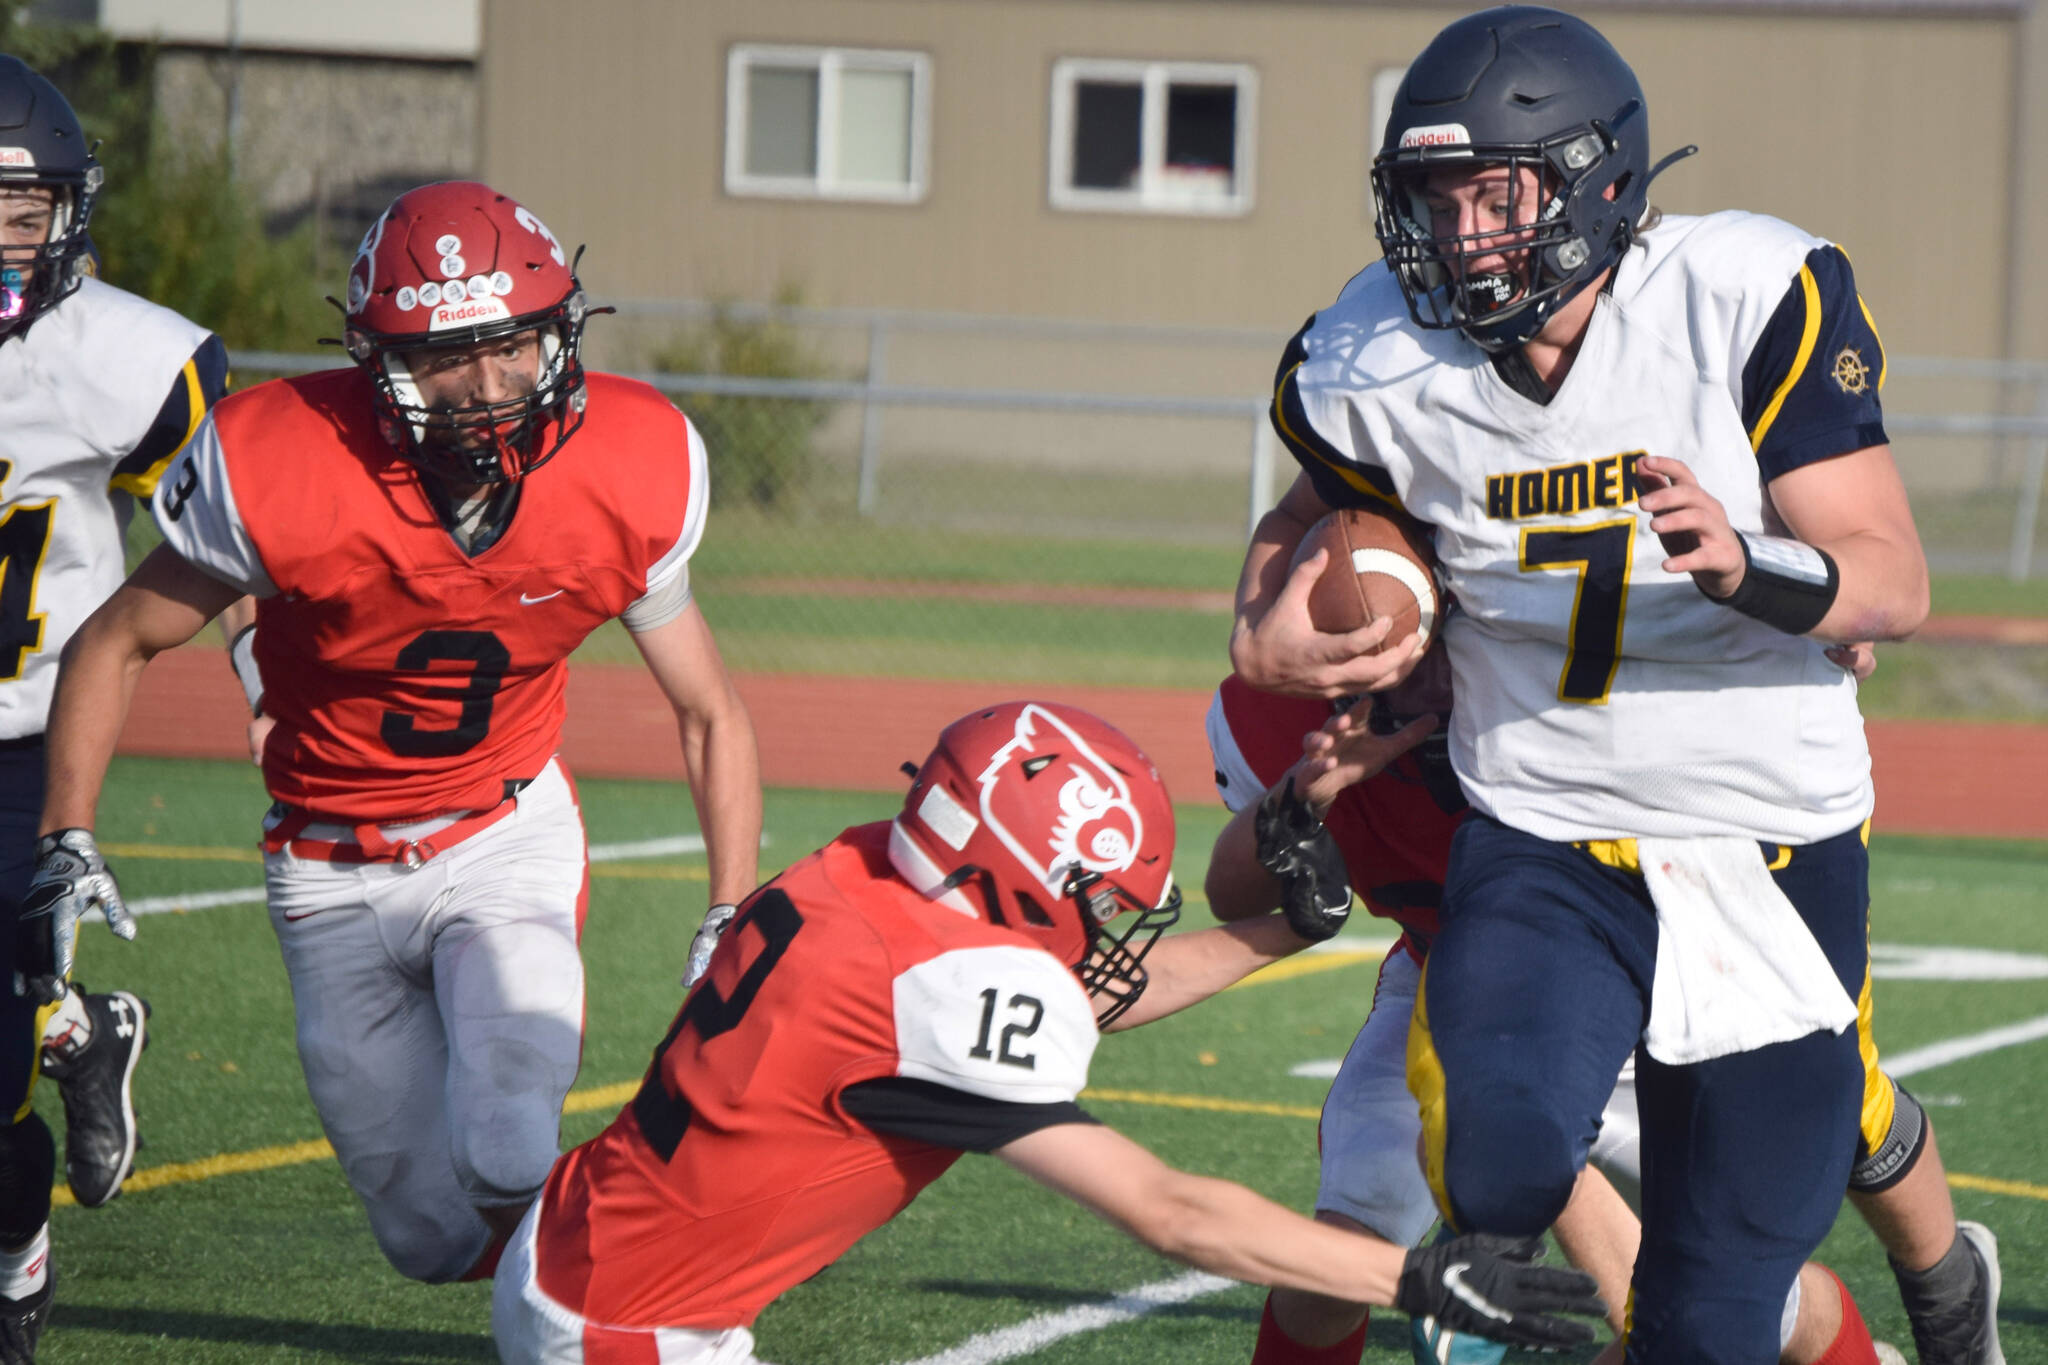 Homer quarterback Carter Tennison tries to avoid the tackle of Kenai Central’s Talon Whicker on Friday, Sept. 17, 2021, at Ed Hollier Field in Kenai, Alaska. (Photo by Jeff Helminiak/Peninsula Clarion)